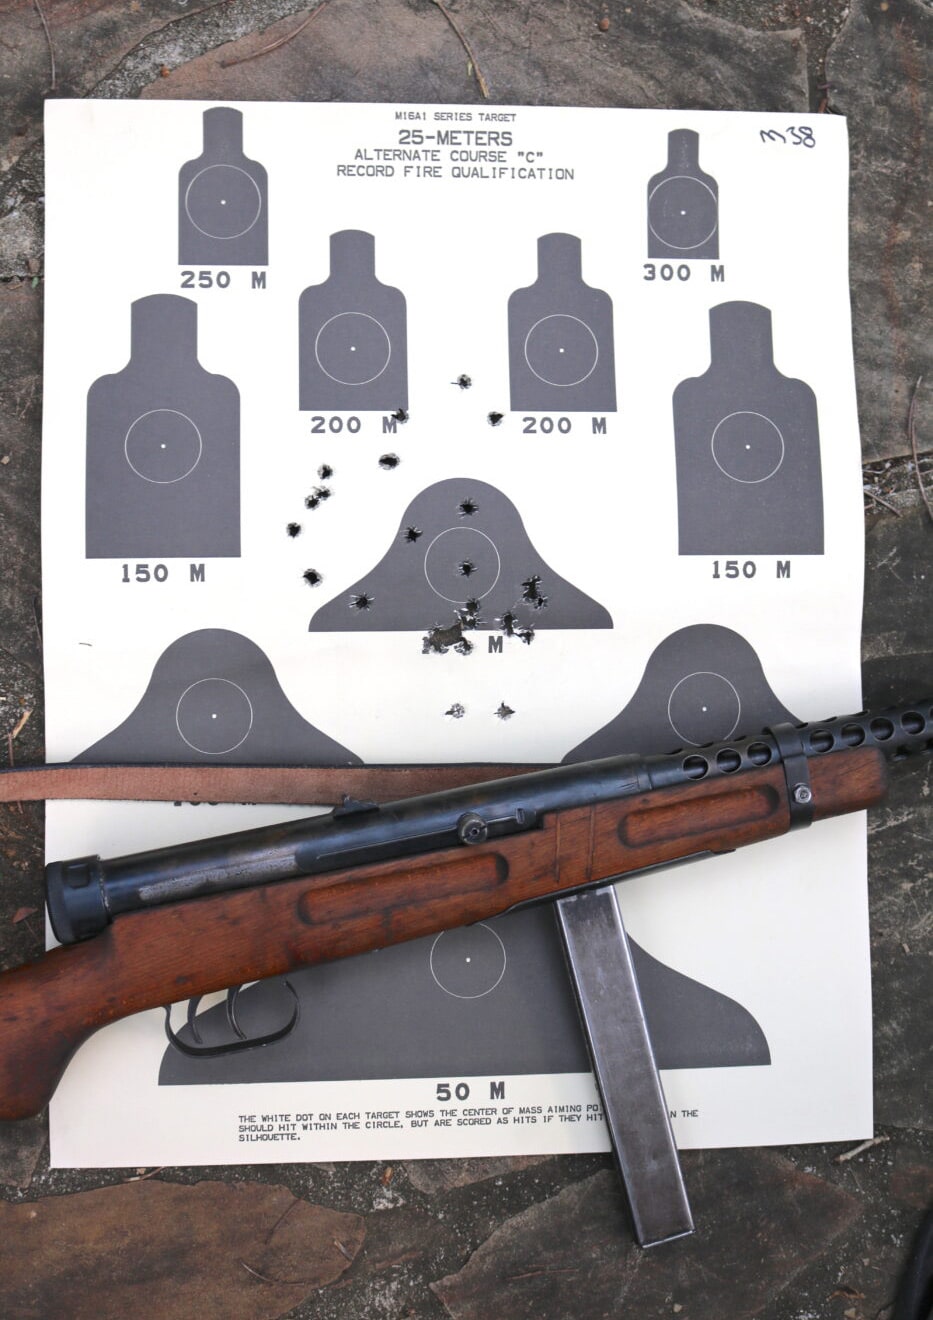 Target after shooting Model 38A on full auto